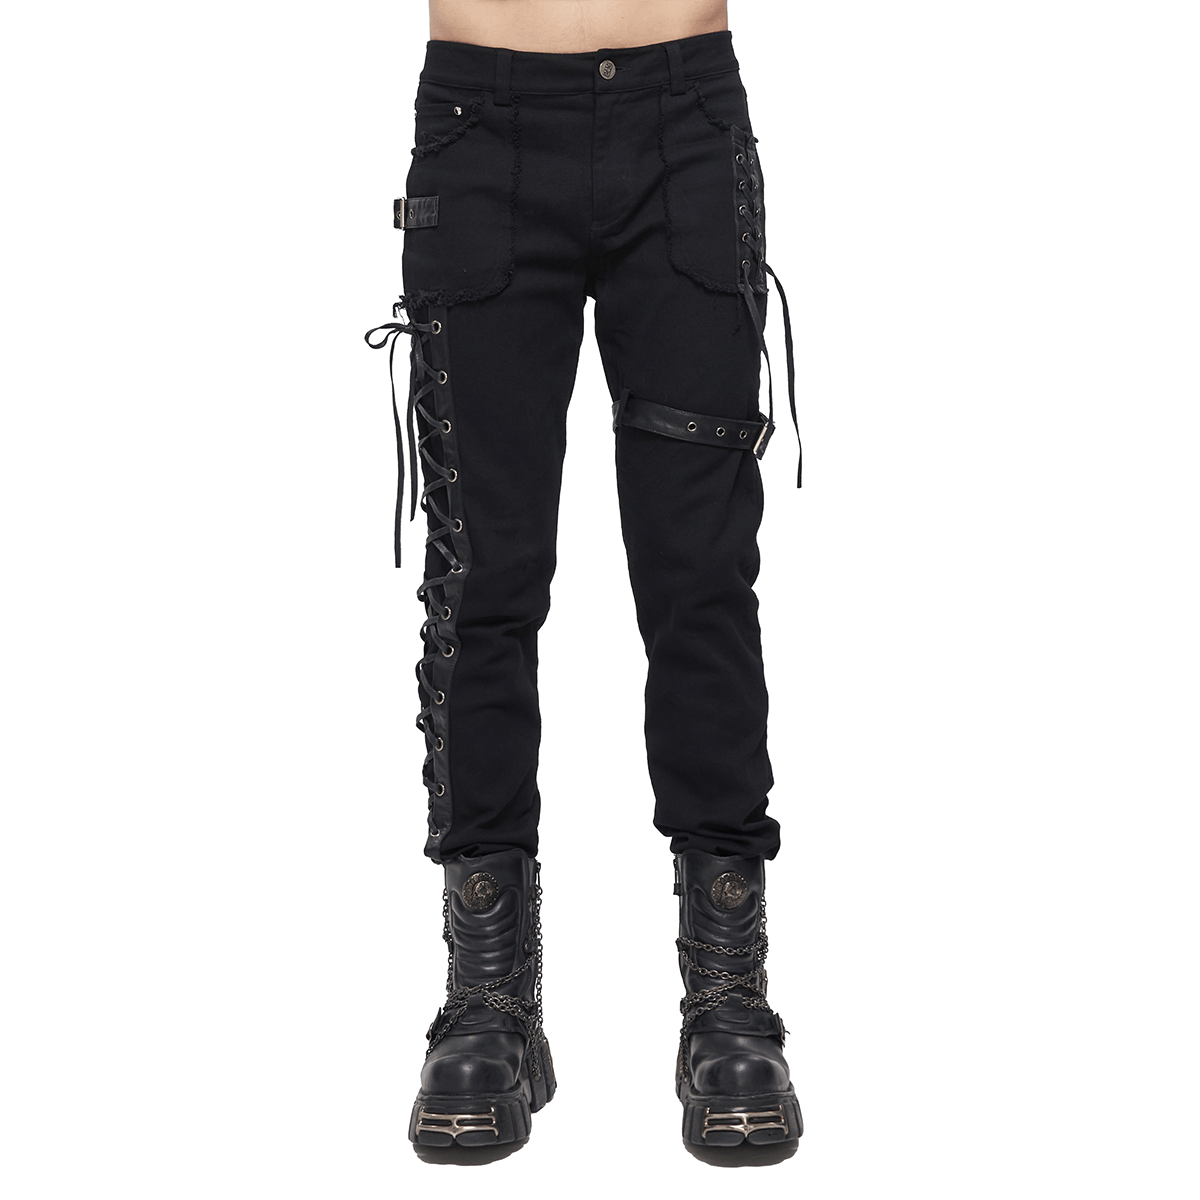 Gothic Punk Straight Trousers With Buckle Belt / Men's Pants with Lacing on Leg and Pocket - HARD'N'HEAVY